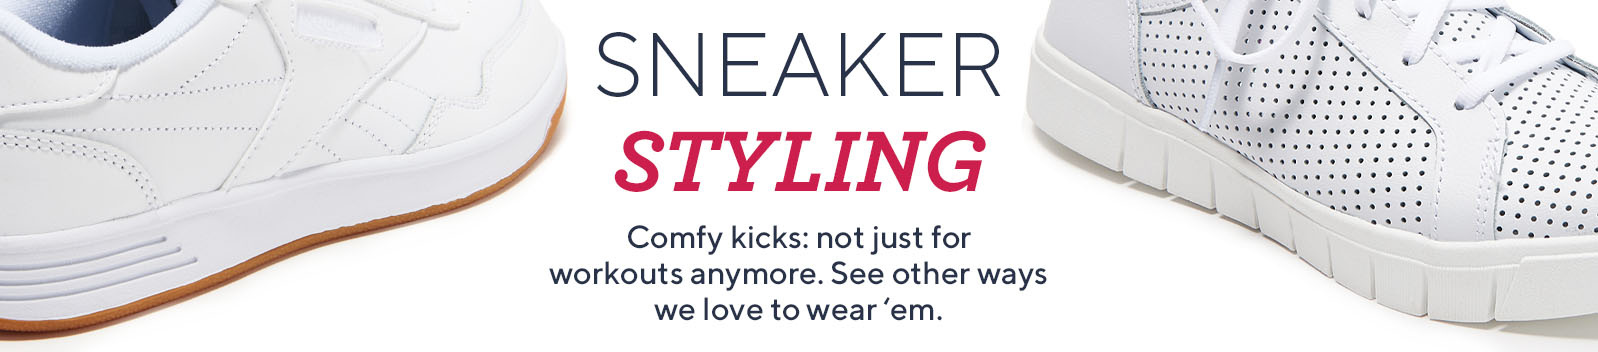 Sneaker Styling.  Comfy kicks: not just for workouts anymore. See other ways we love to wear 'em.